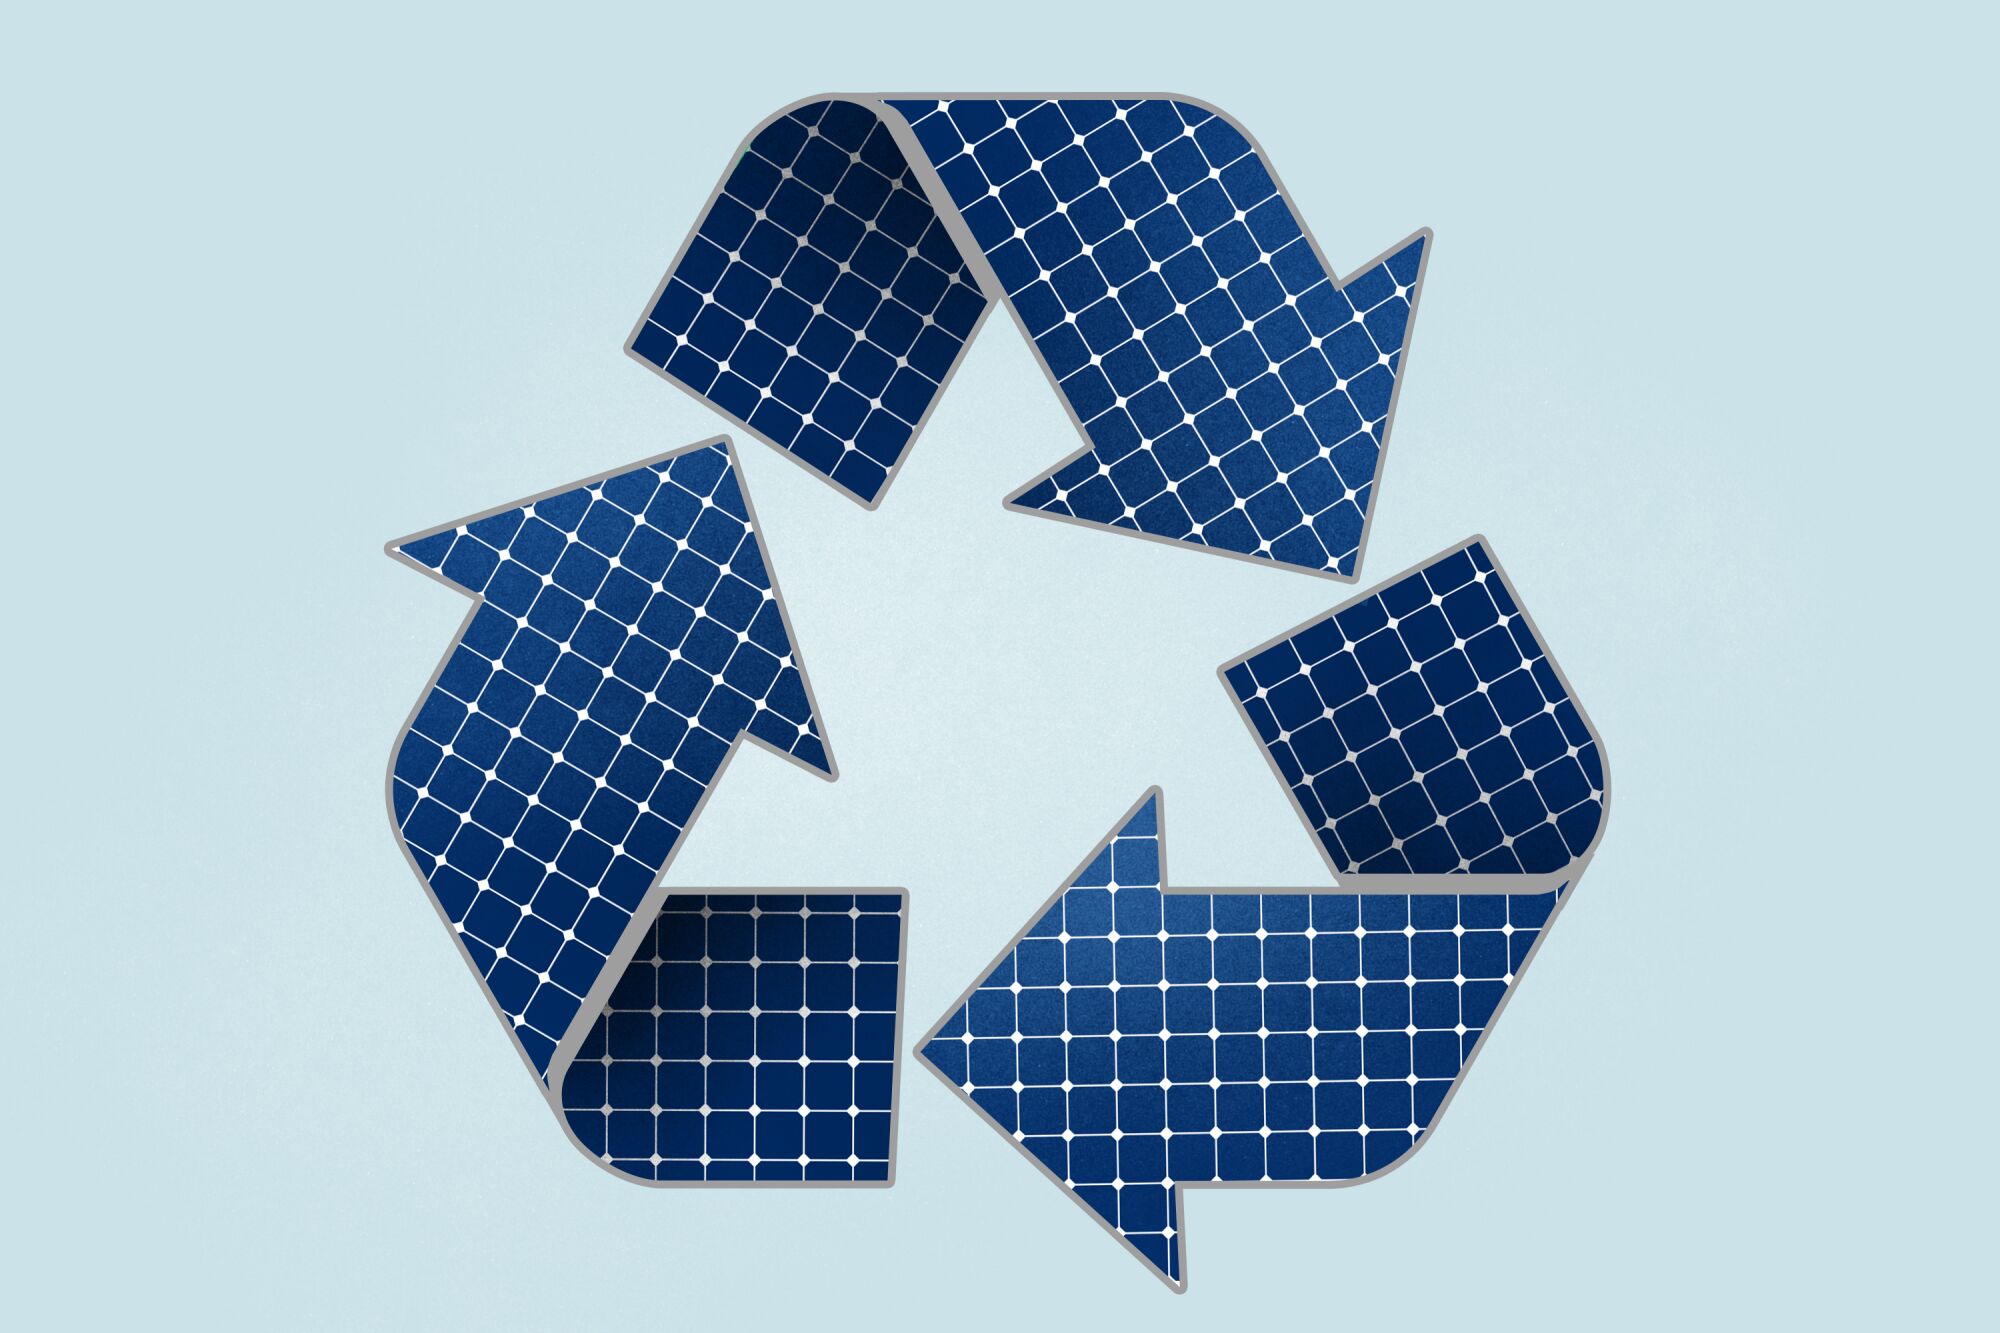 Illustration of recycling logo formed out of solar panels